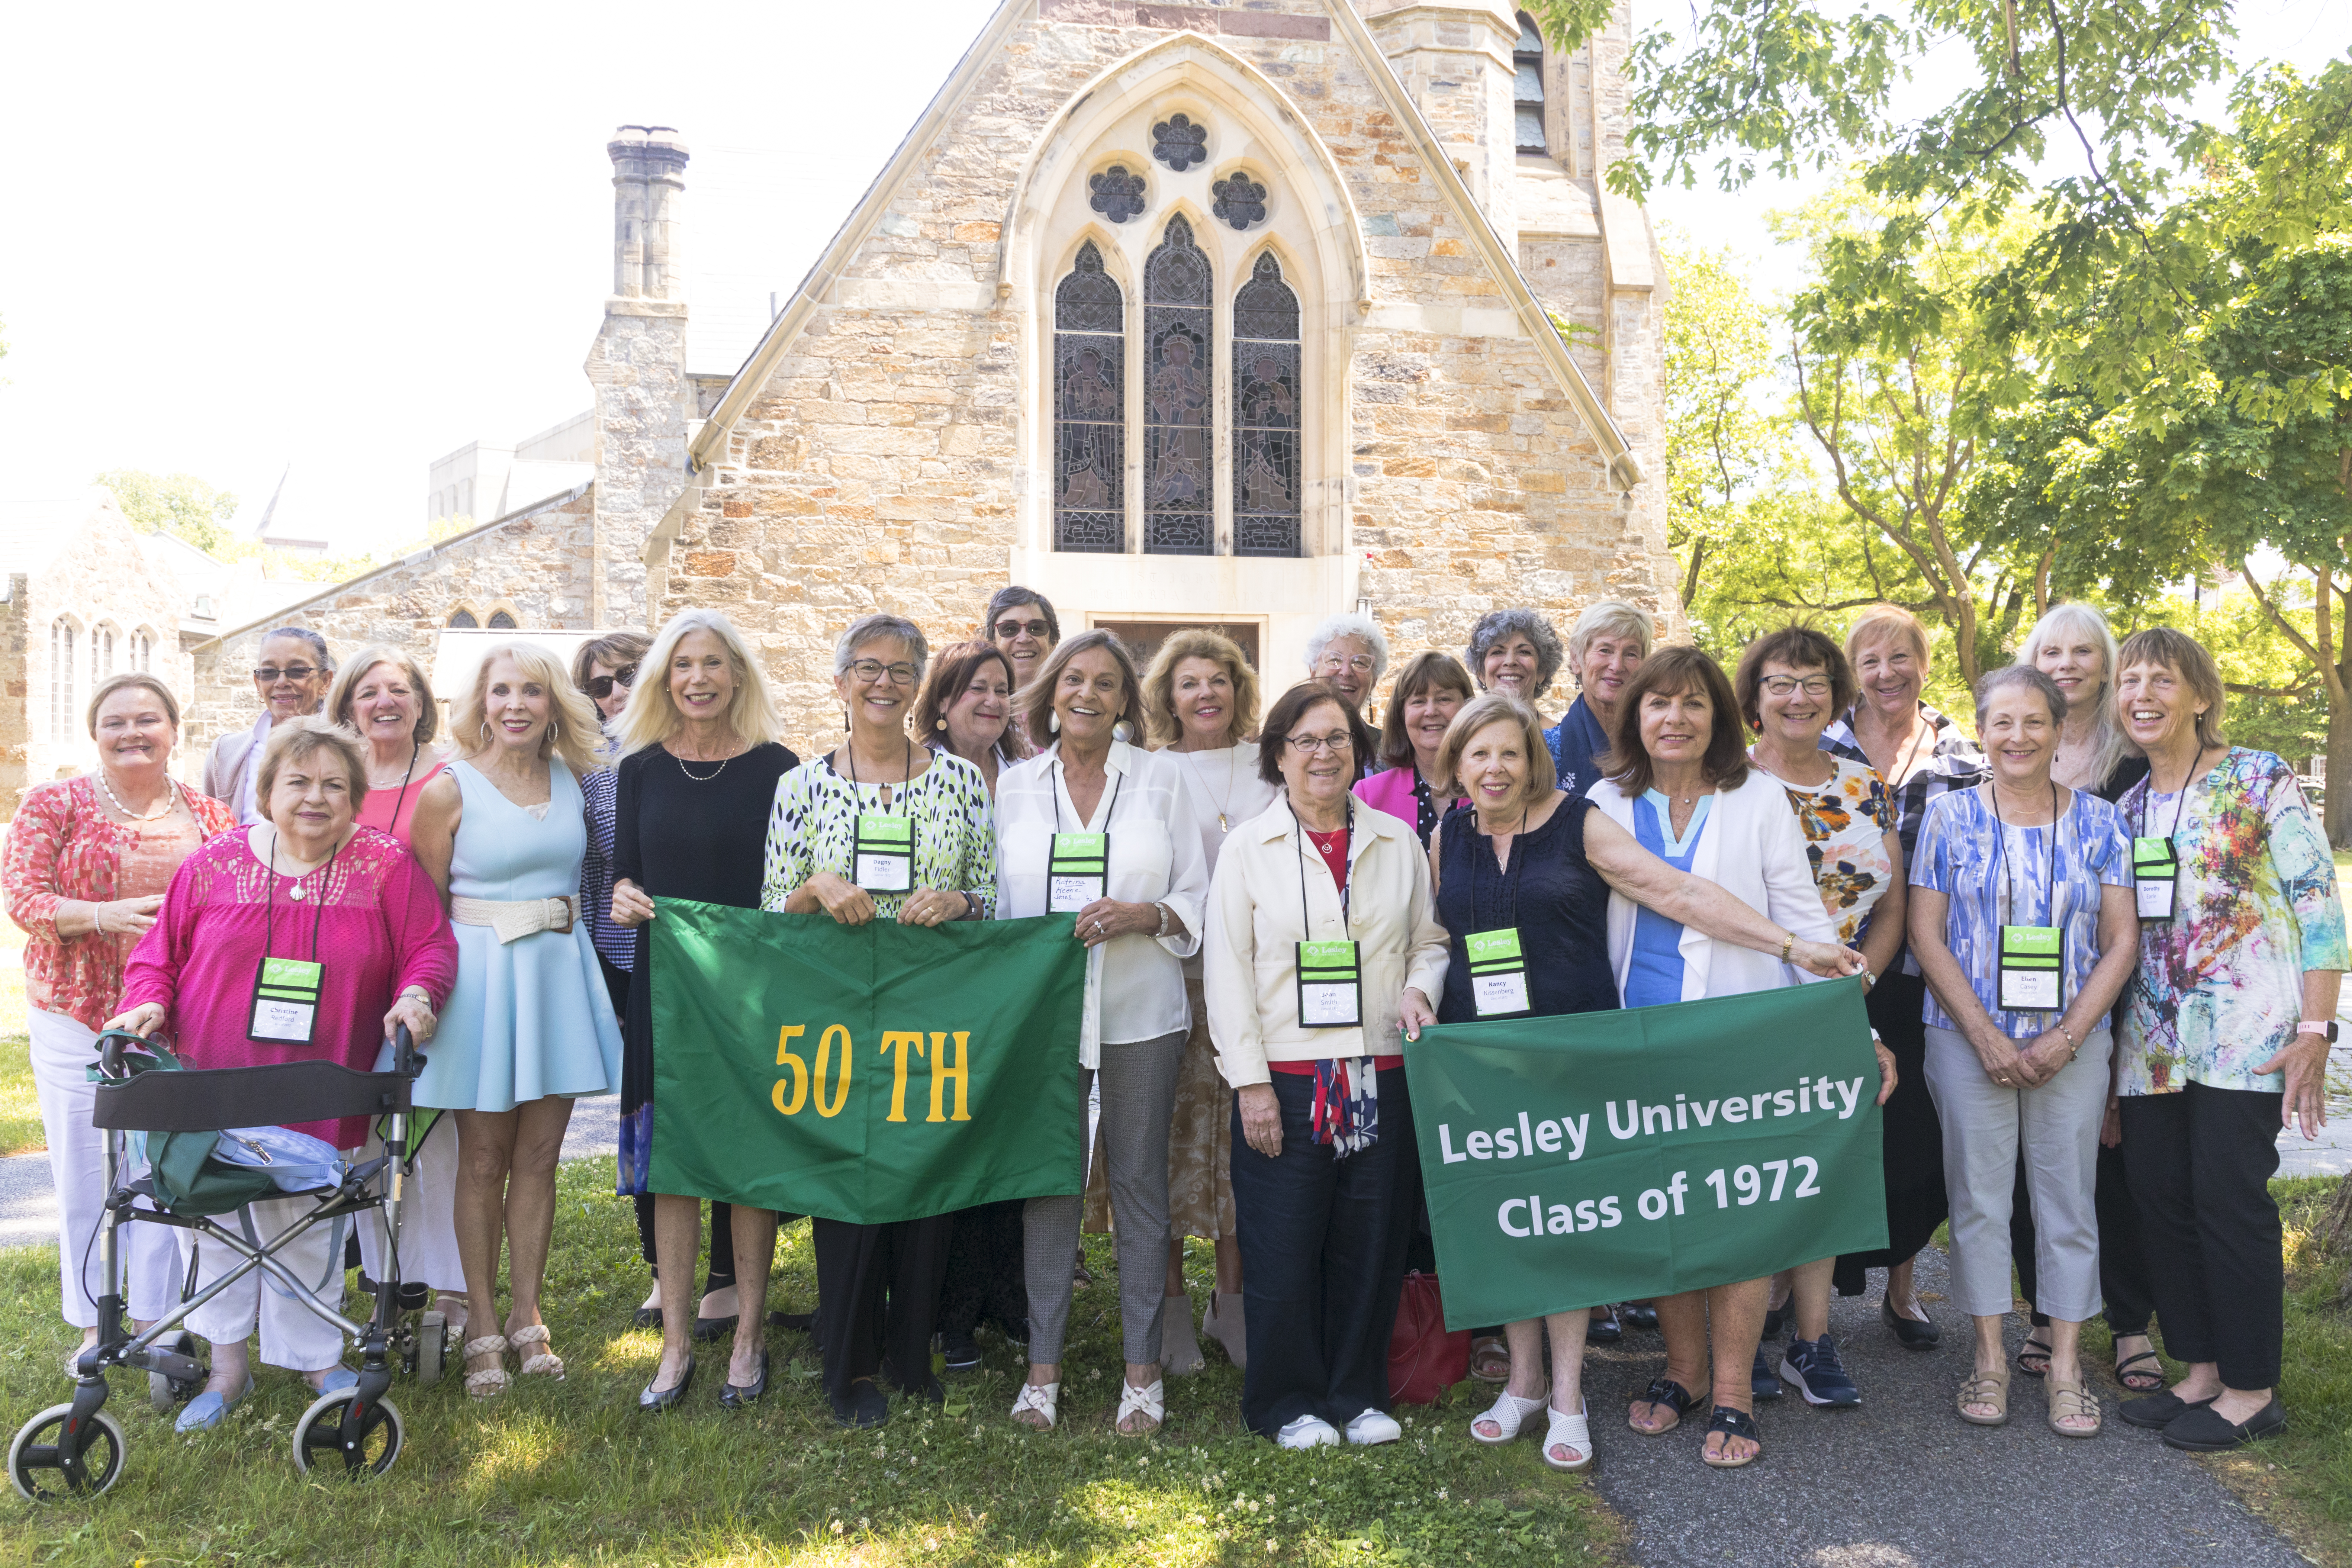 The Class of 1972 poses with their class banner